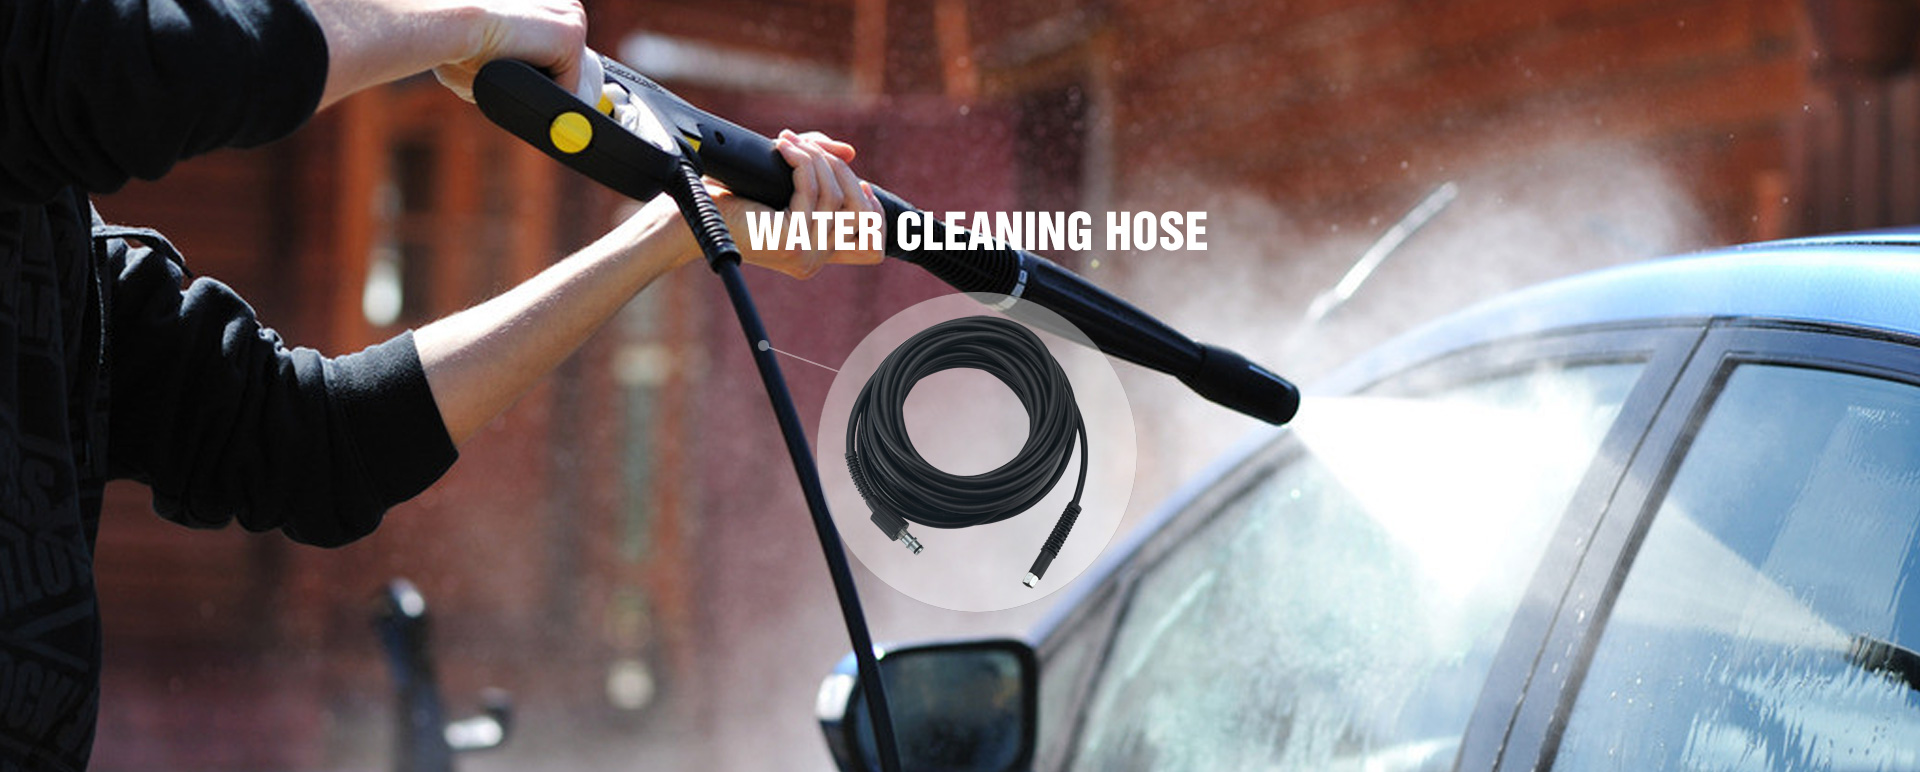 Water cleaning hose